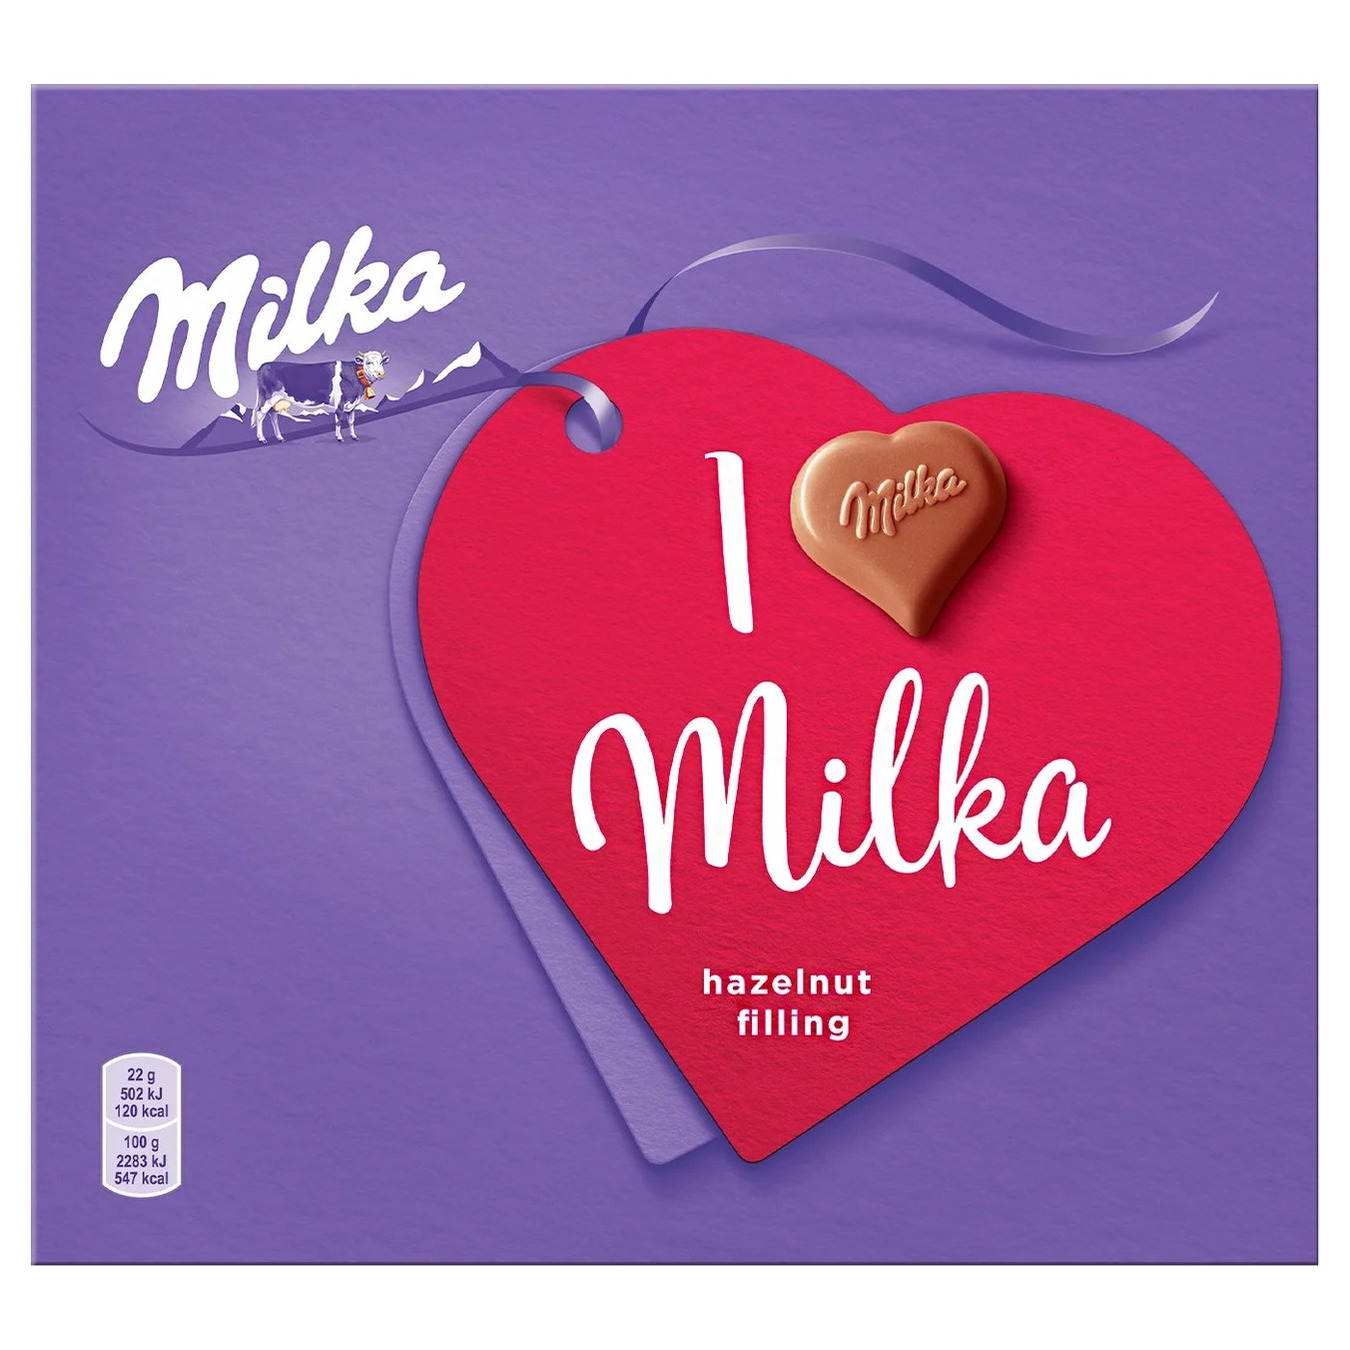 Milka candy from milk chocolate with nut filling 110g